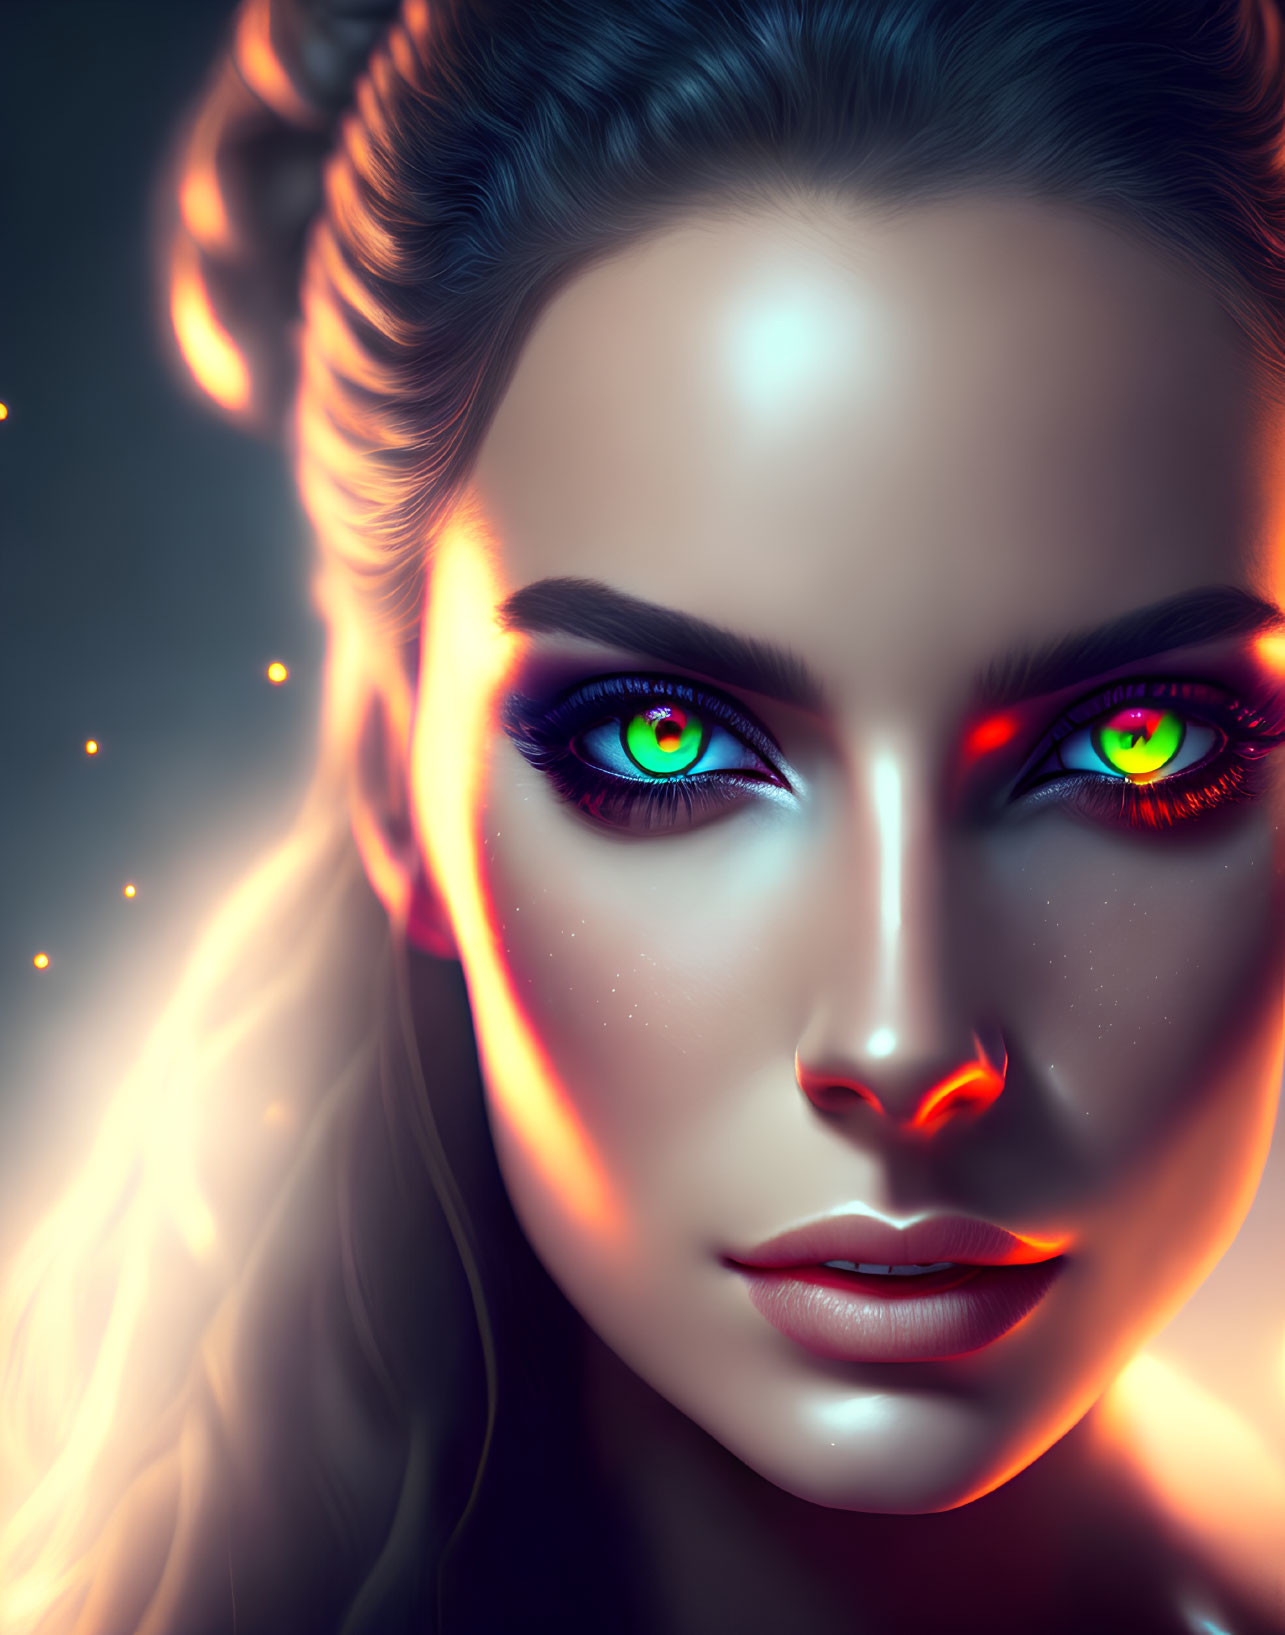 Digital portrait: Woman with luminous green eyes and fiery sparks on radiant skin against dark backdrop